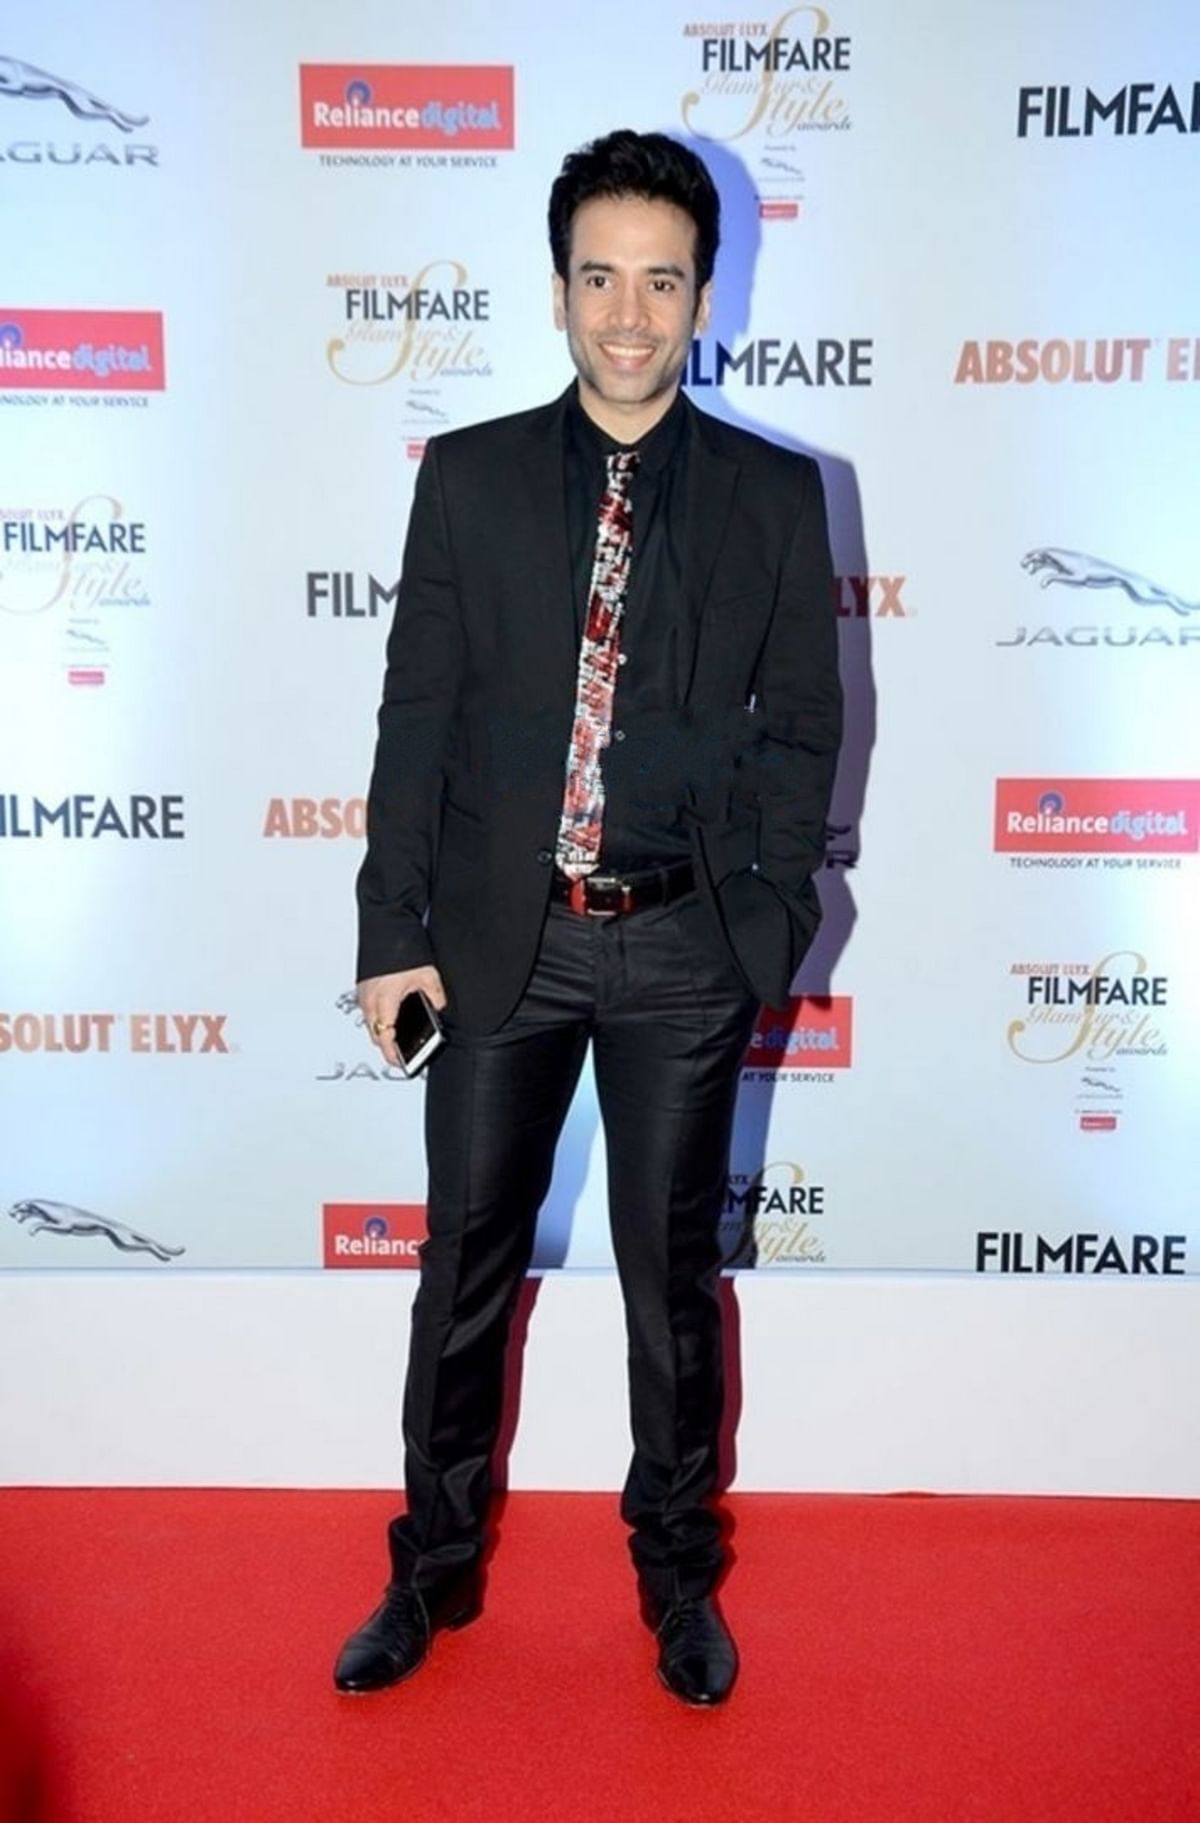 Appalling to see so much fake one-sided news about India on foreign media, says Tusshar Kapoor